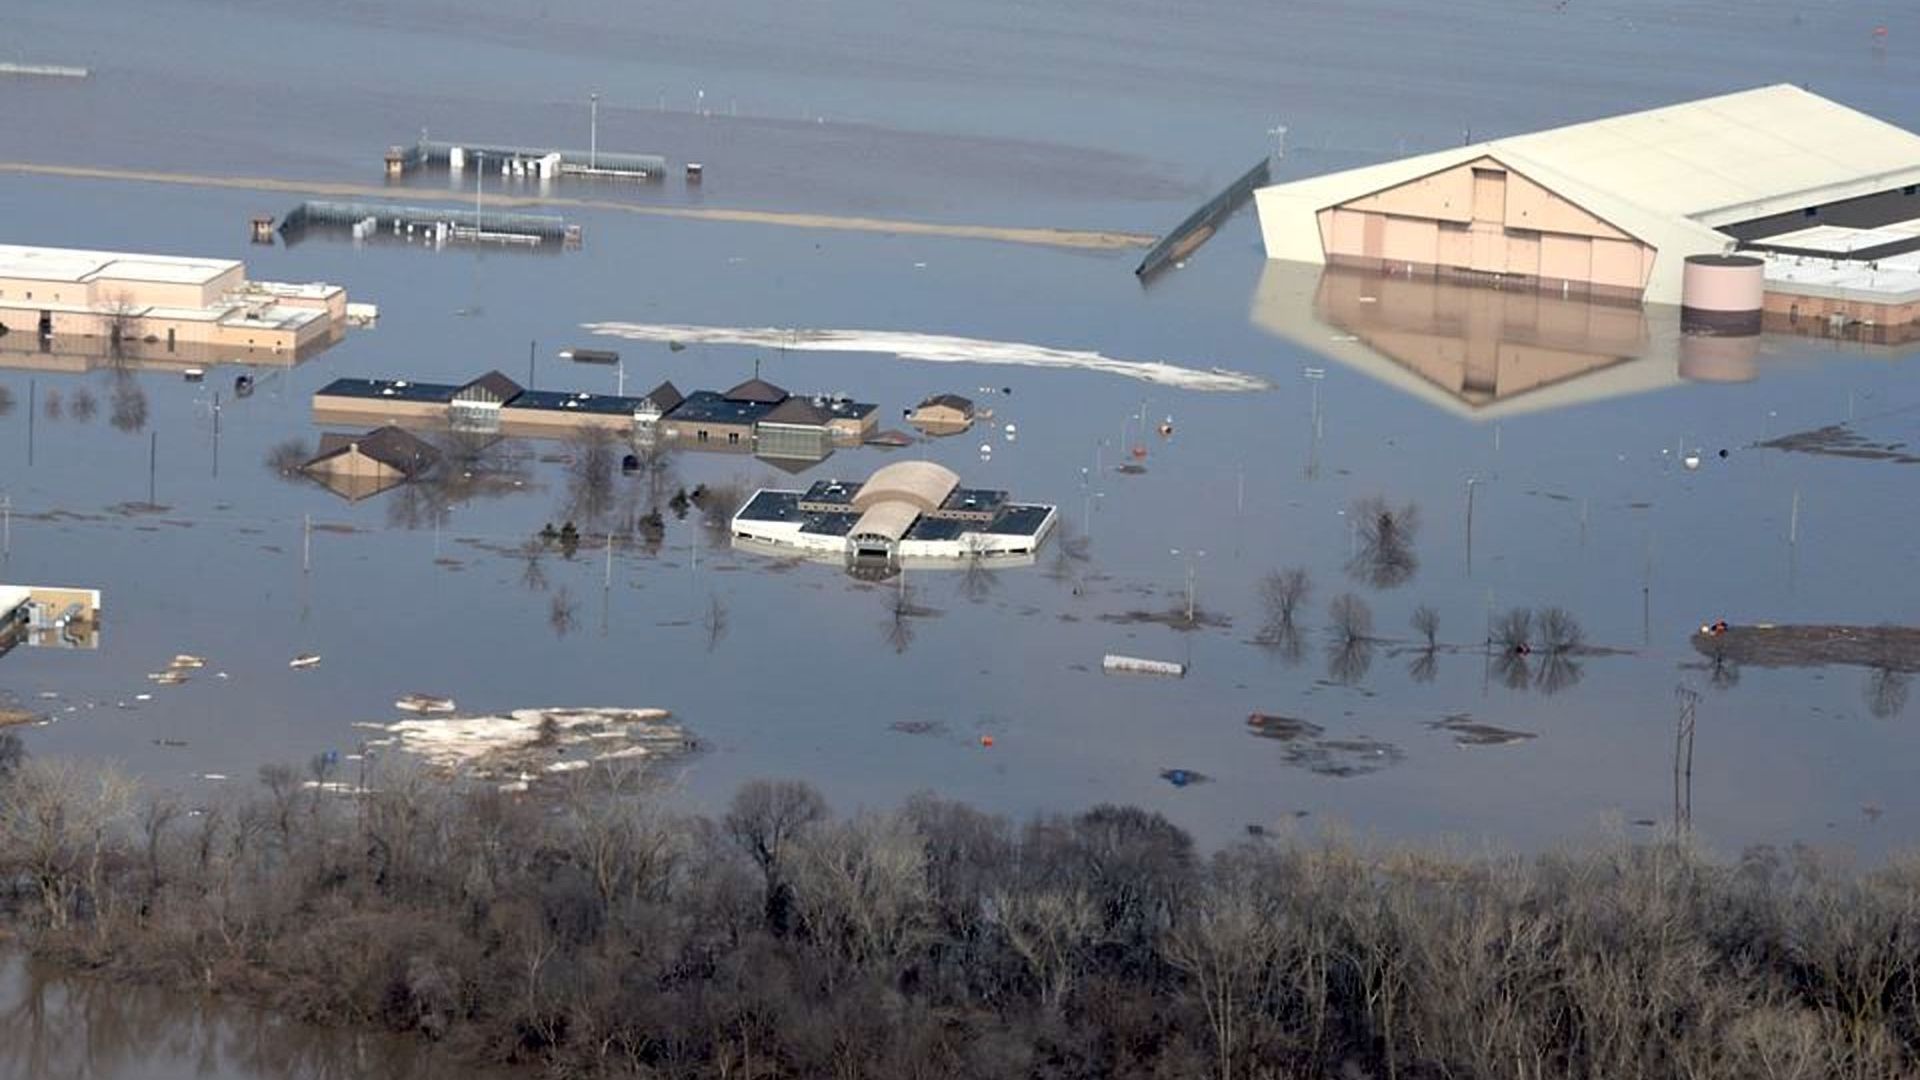 Offutt Air Force Base's aerial photo shows the scope of the flood damage in Nebraska. 